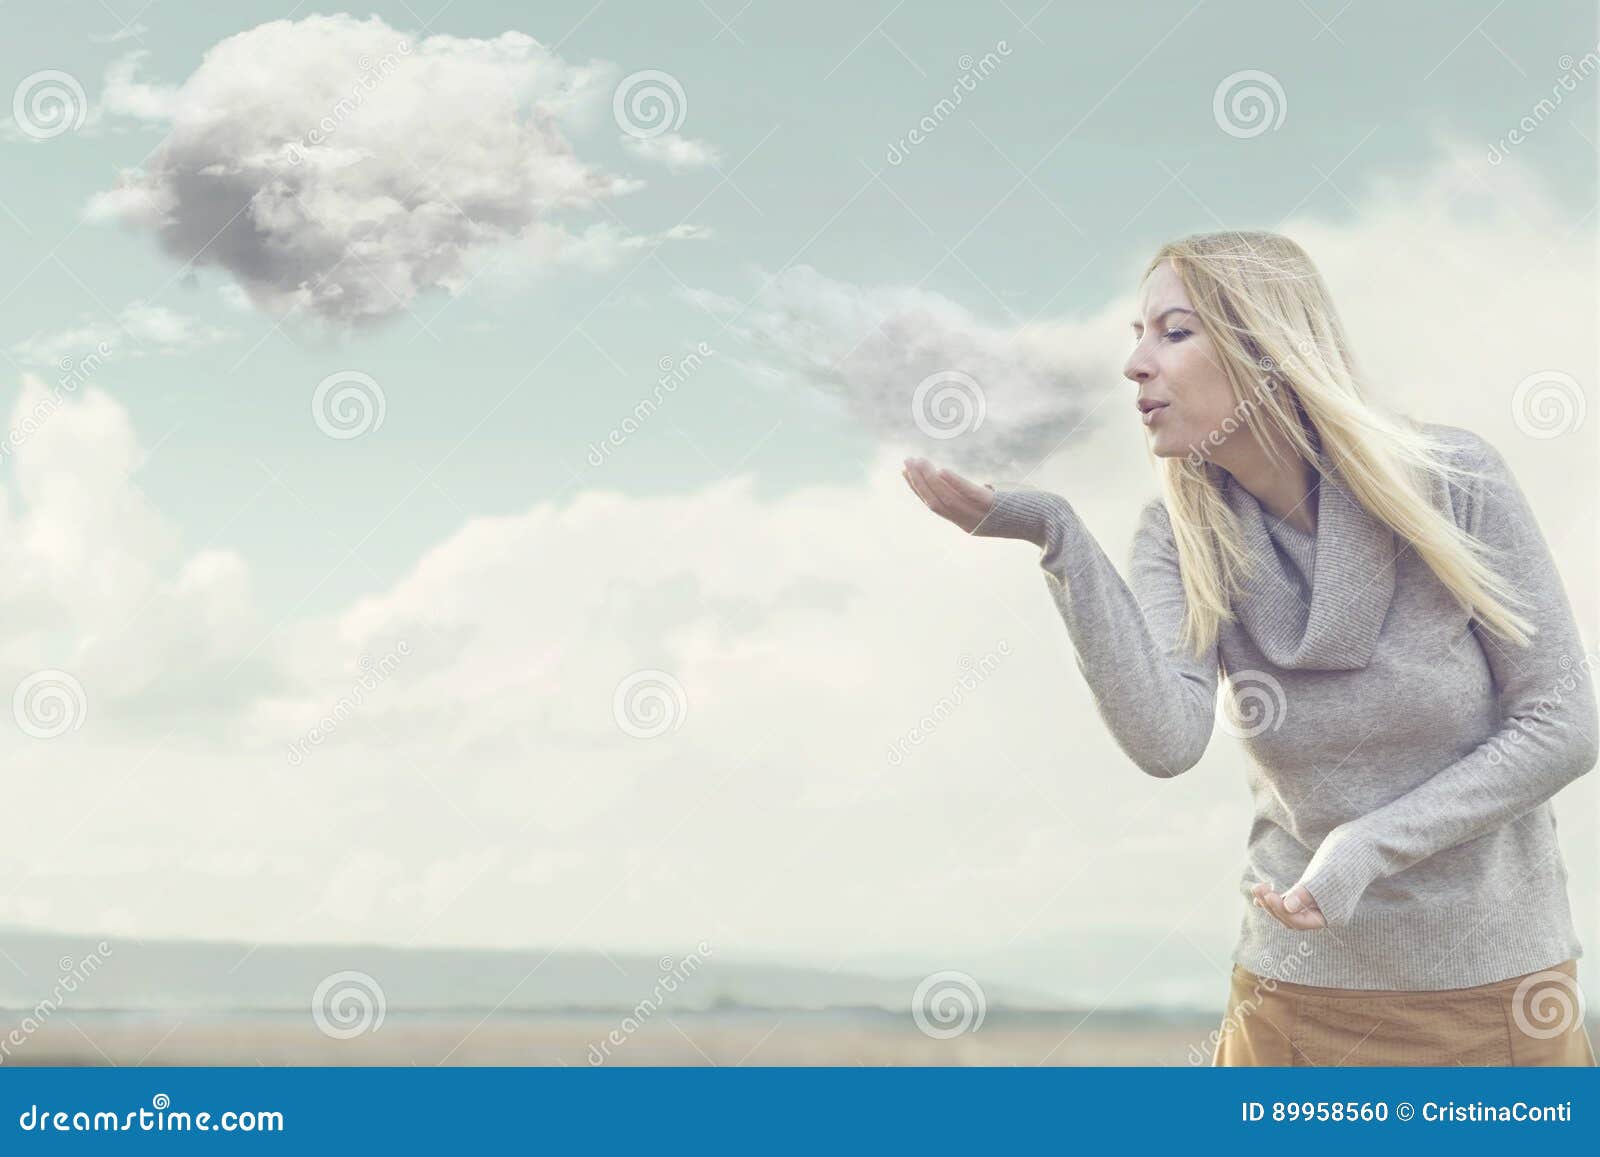 woman with magical powers creating clouds